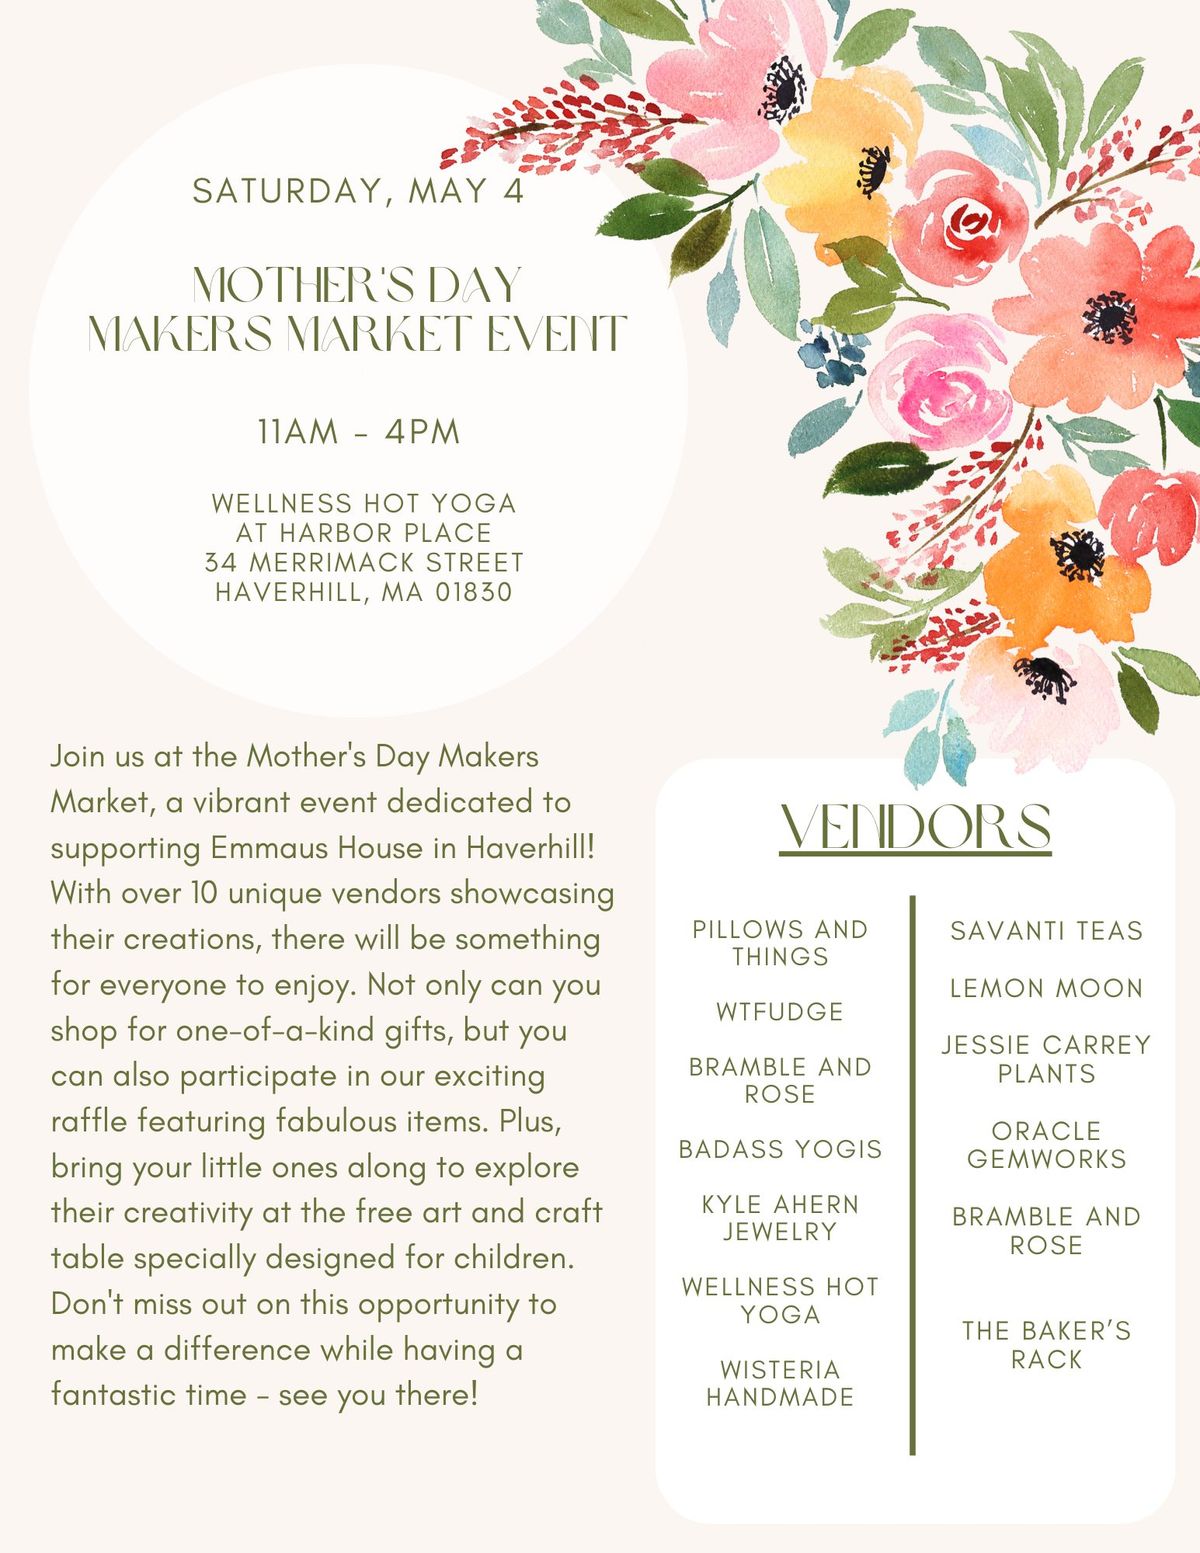 Mother's Day Makers Market Event